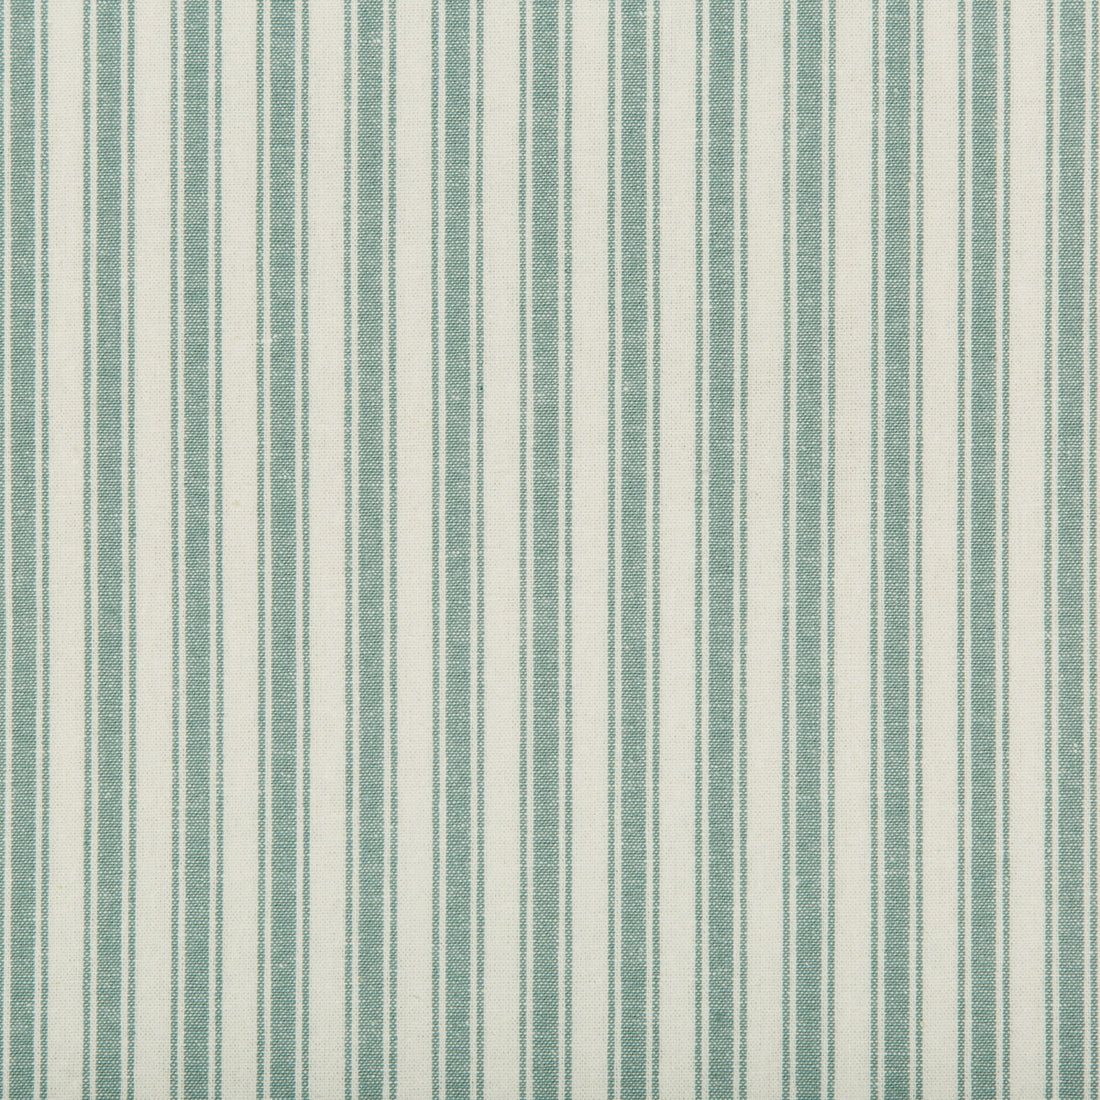 Seastripe fabric in teal color - pattern 35542.135.0 - by Kravet Basics in the Bermuda collection